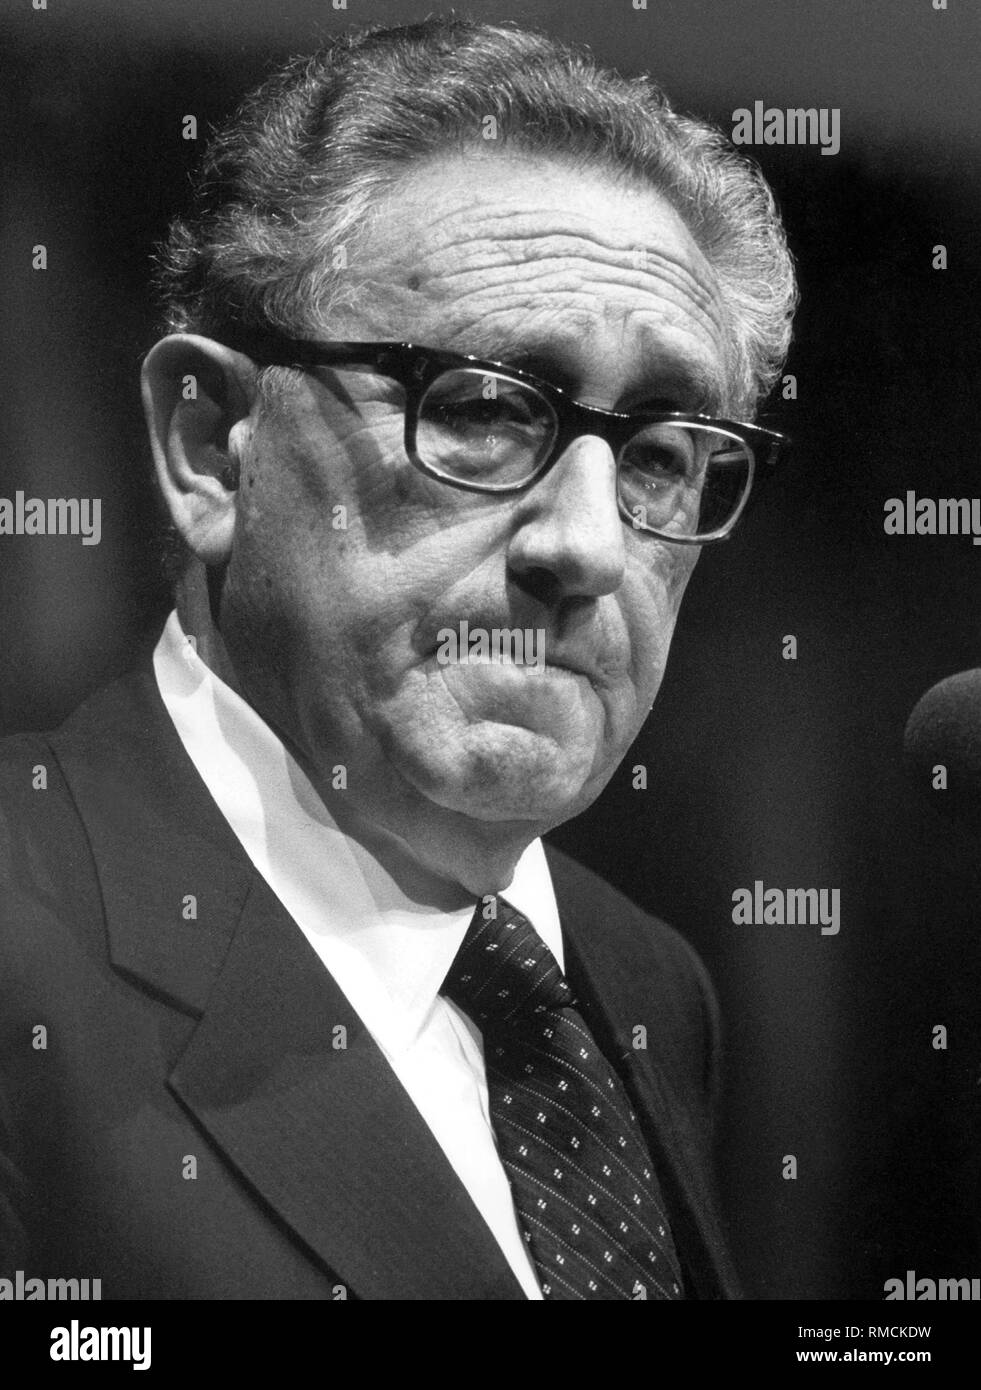 Henry A. Kissinger (born 1923), an American politician and former foreign minister. Stock Photo